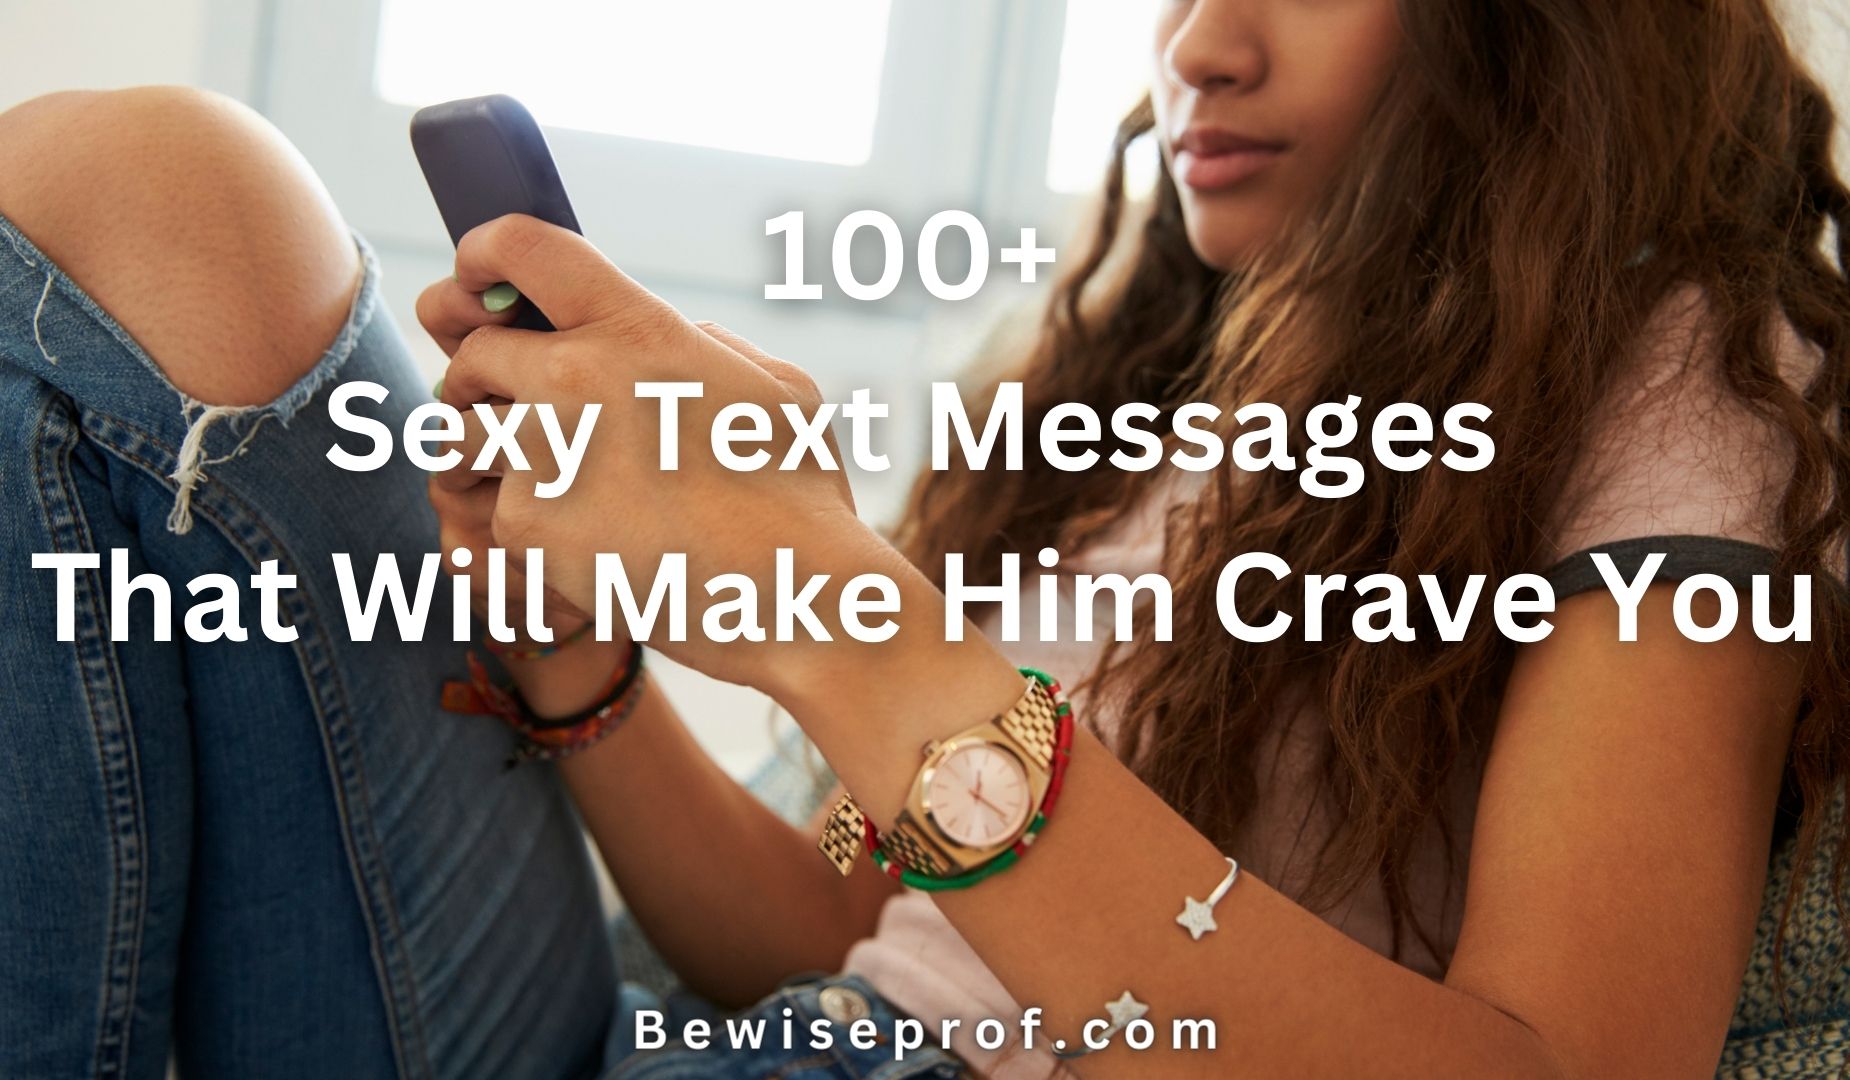 100+ Sexy Text Messages That Will Make Him Crave You